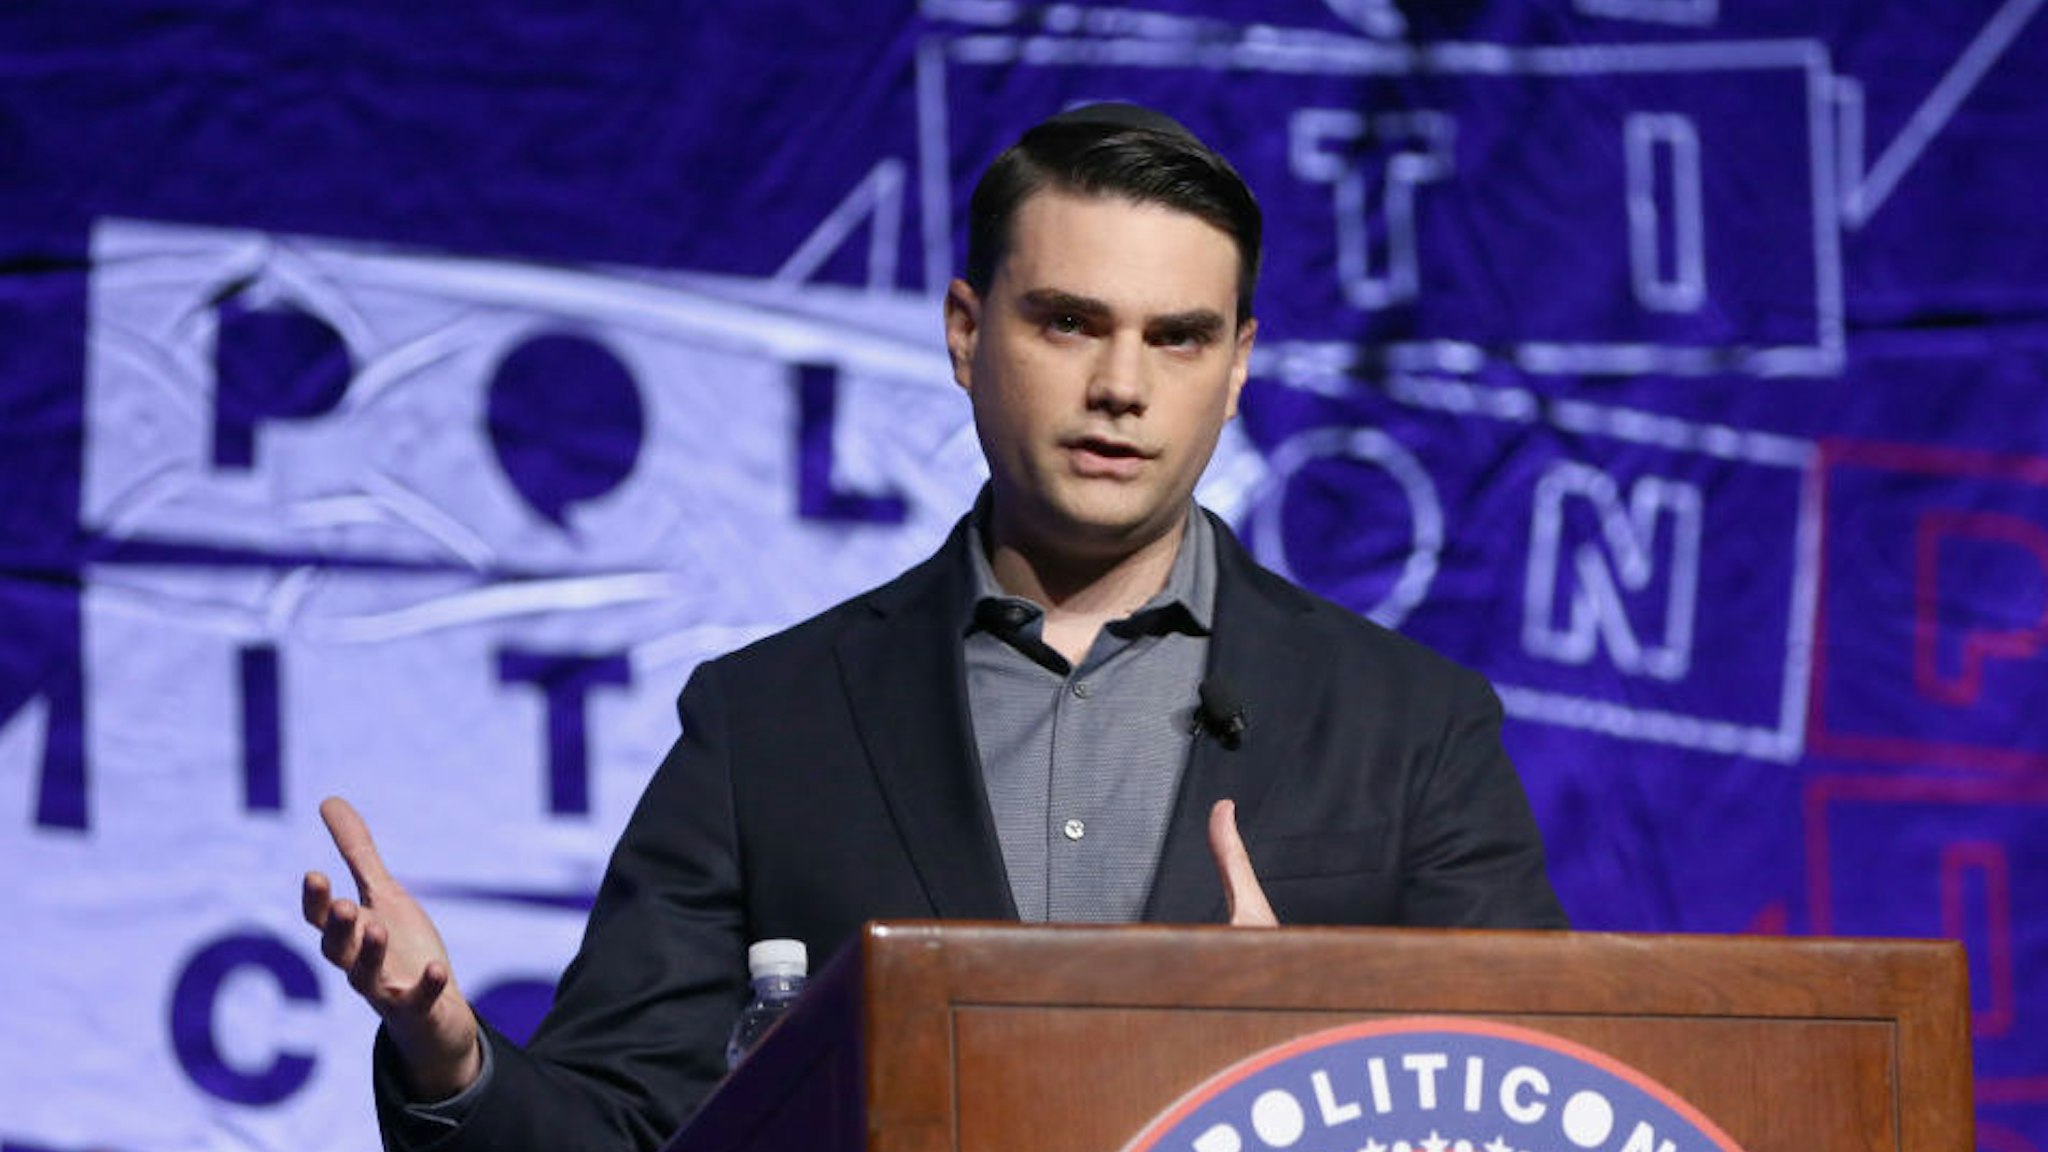 Ben Shapiro speaks onstage during Politicon 2018 at Los Angeles Convention Center on October 21, 2018 in Los Angeles, California. (Photo by Rich Polk/Getty Images for Politicon)